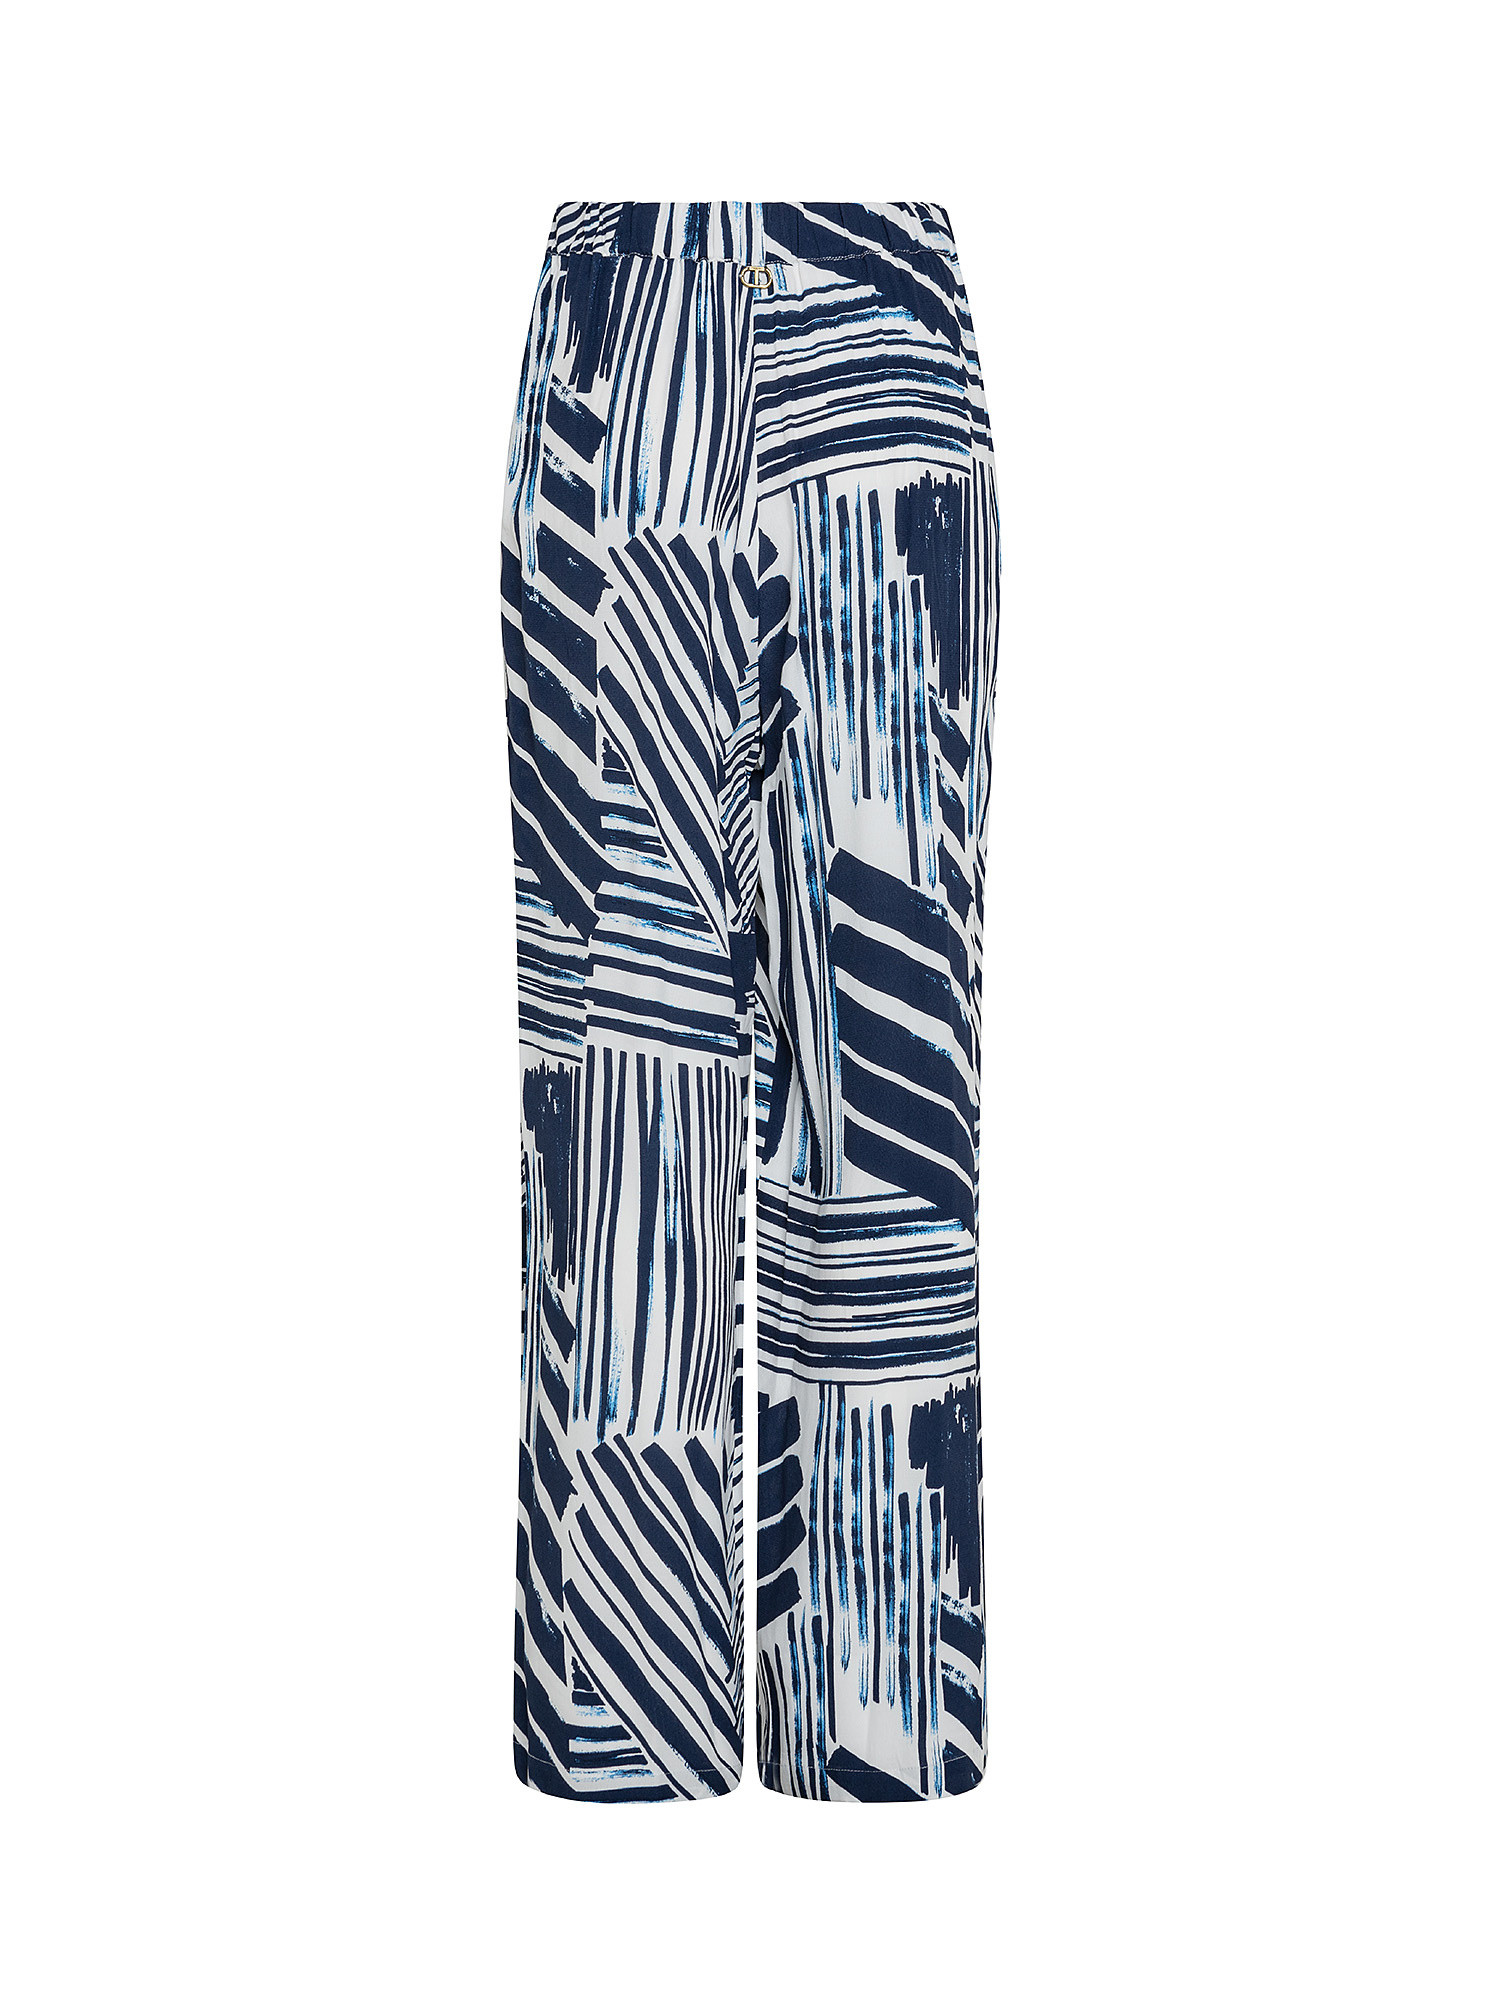 Trousers with striped print, Multicolor, large image number 1